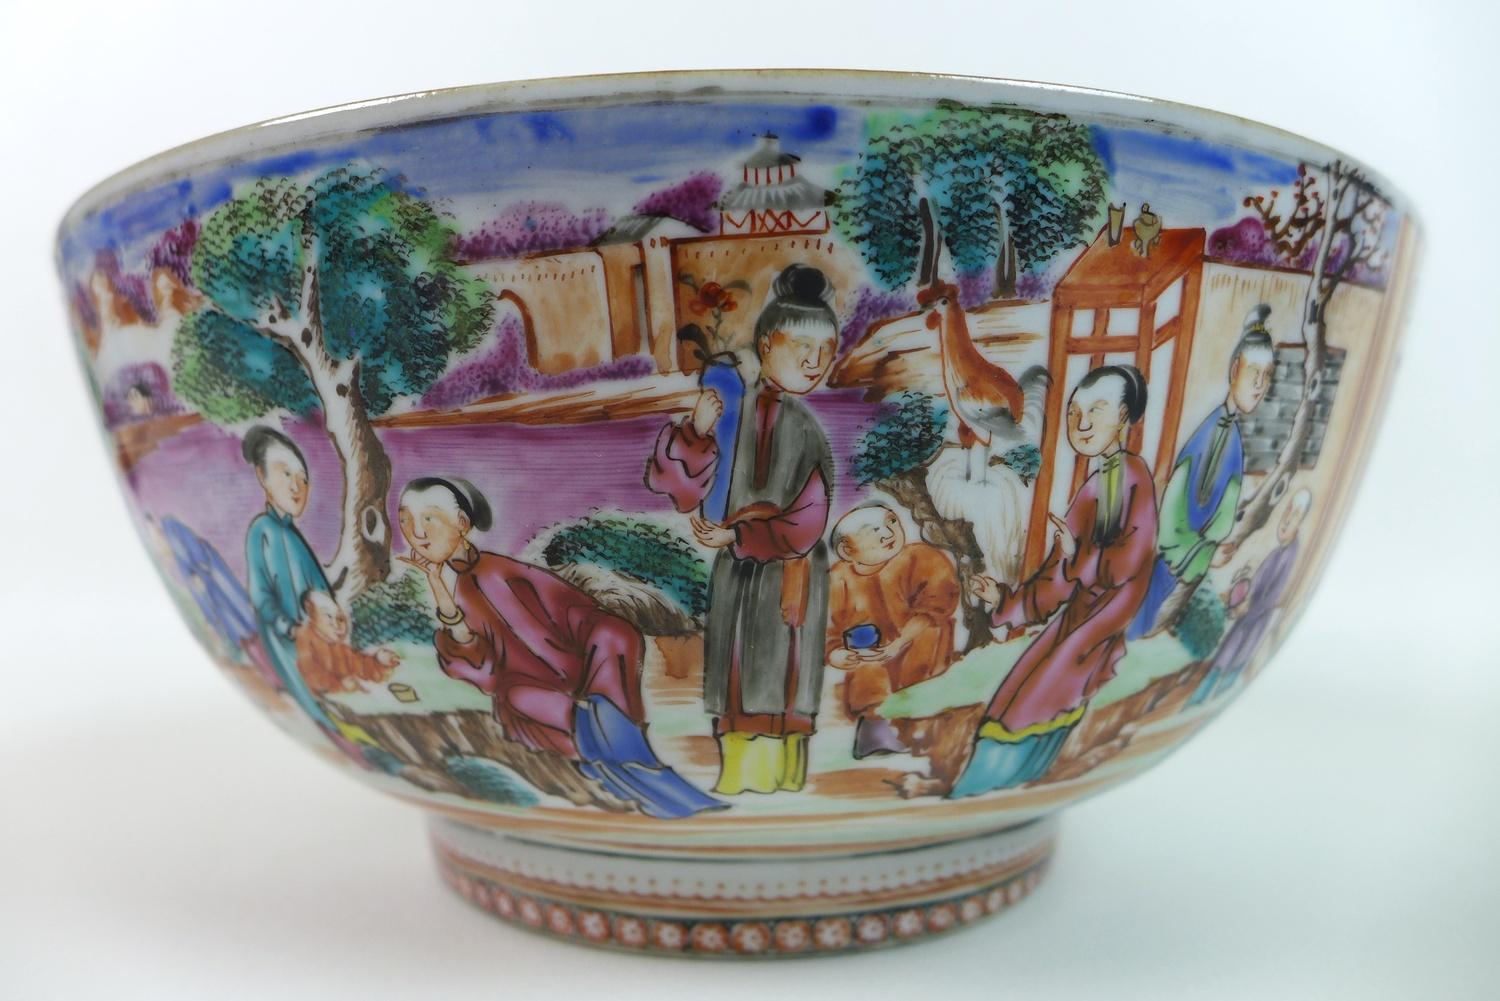 A Chinese Export porcelain famille rose punch bowl, Qing Dynasty, late 18th century, polychrome - Image 5 of 20